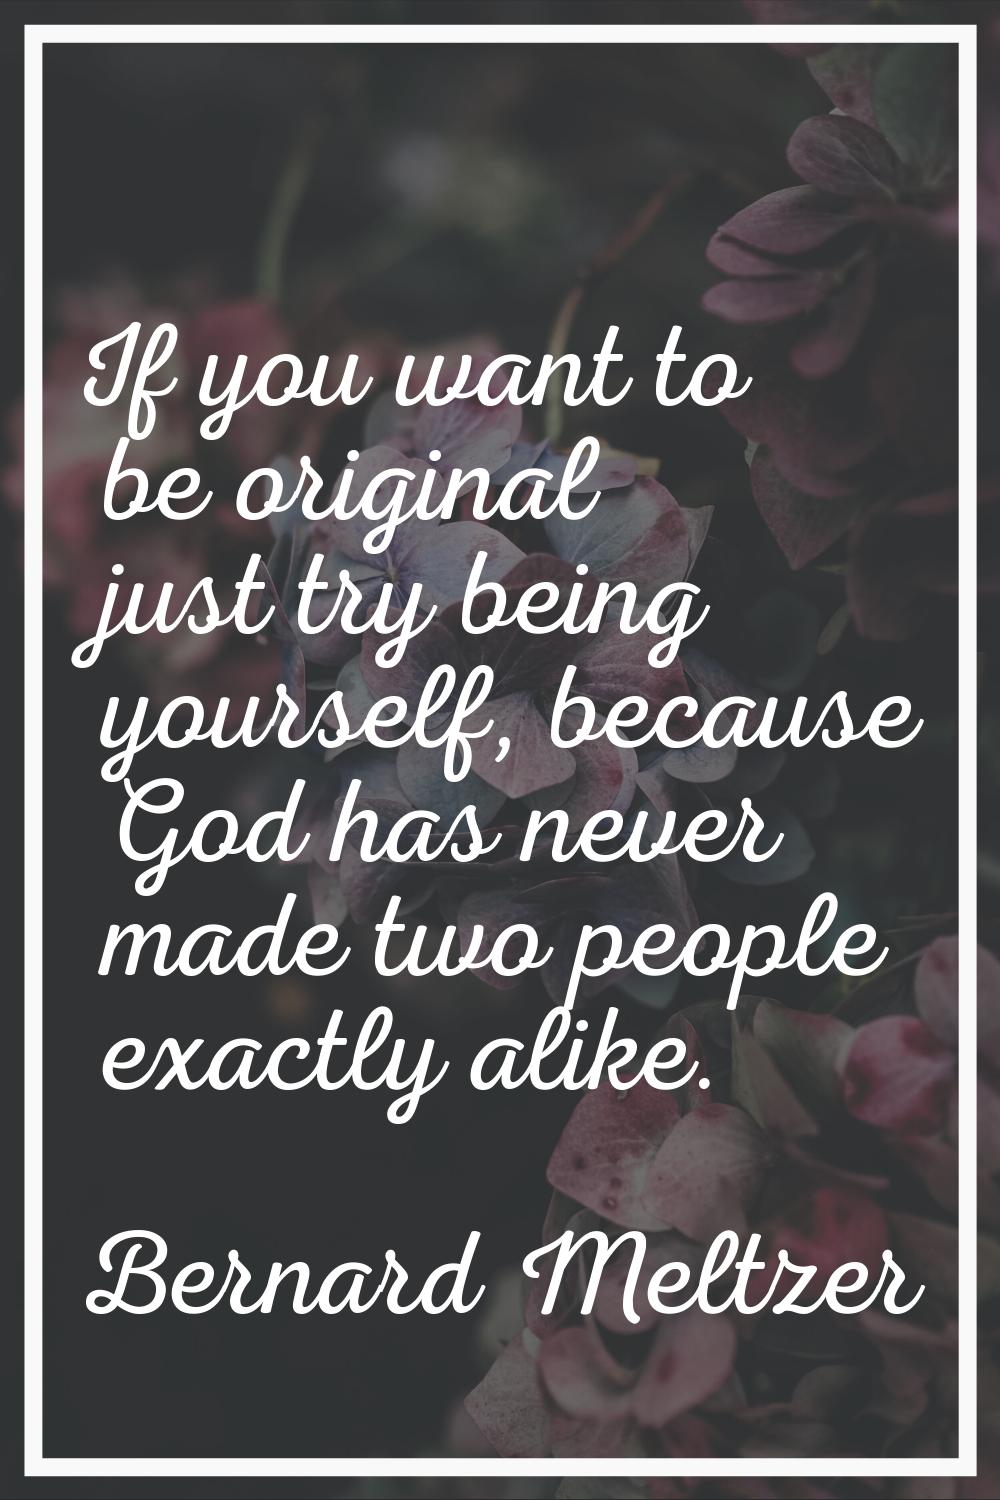 If you want to be original just try being yourself, because God has never made two people exactly a